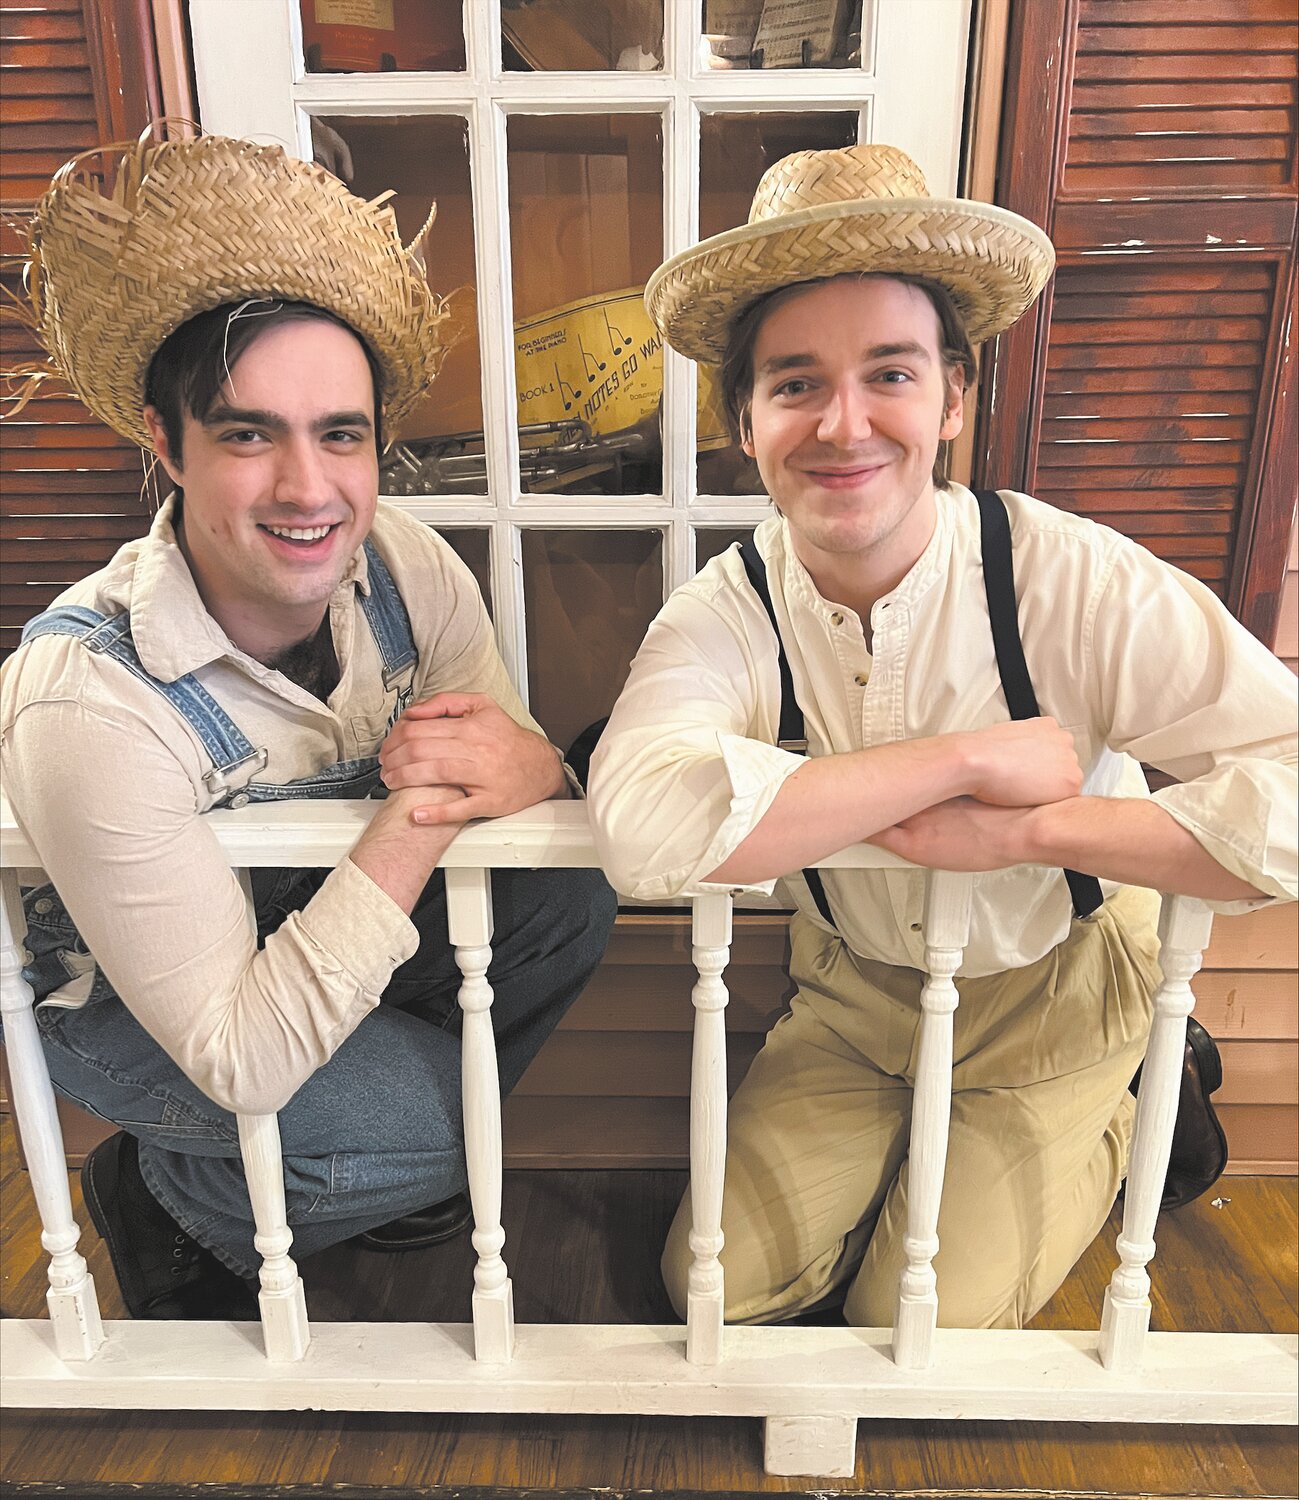 Cooper Fitch (Huckleberry Finn) and Matthew Porter (Tom Sawyer) on Aunt Polly's porch talking about the adventures ahead of them.